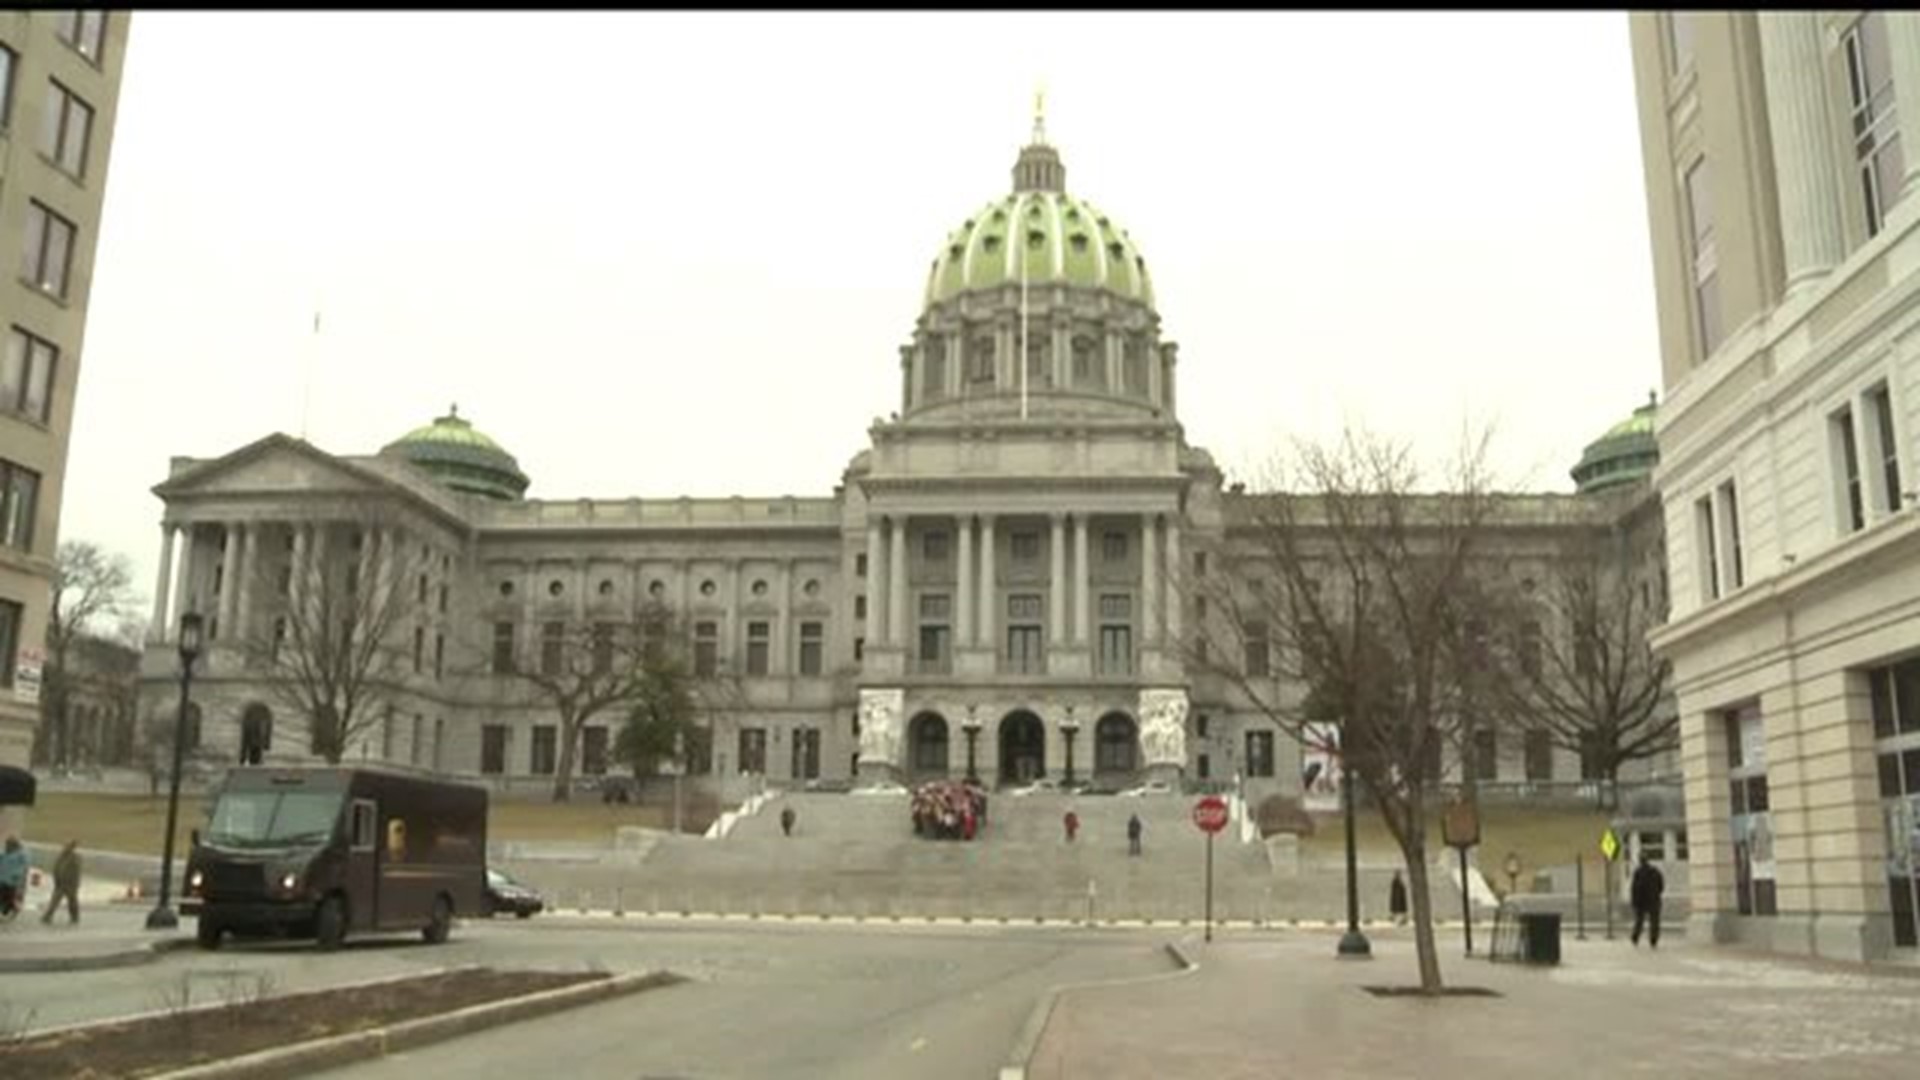 Problems with pension reform in Harrisburg